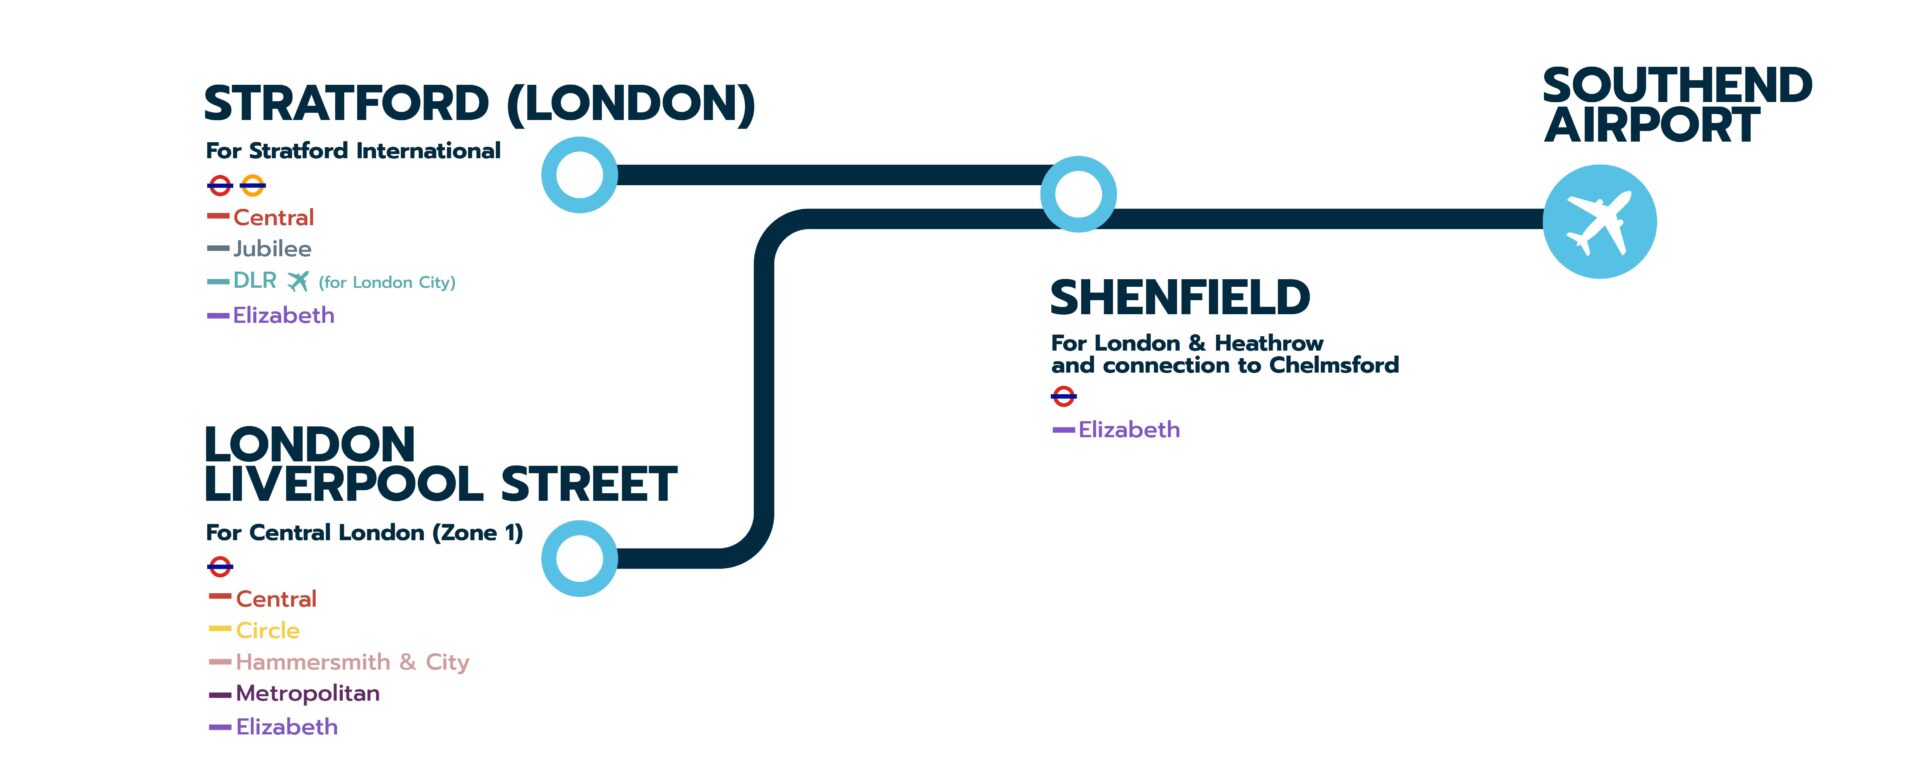 Rail connectivity from Central London via Stratford or London Liverpool Street to Southend Airport